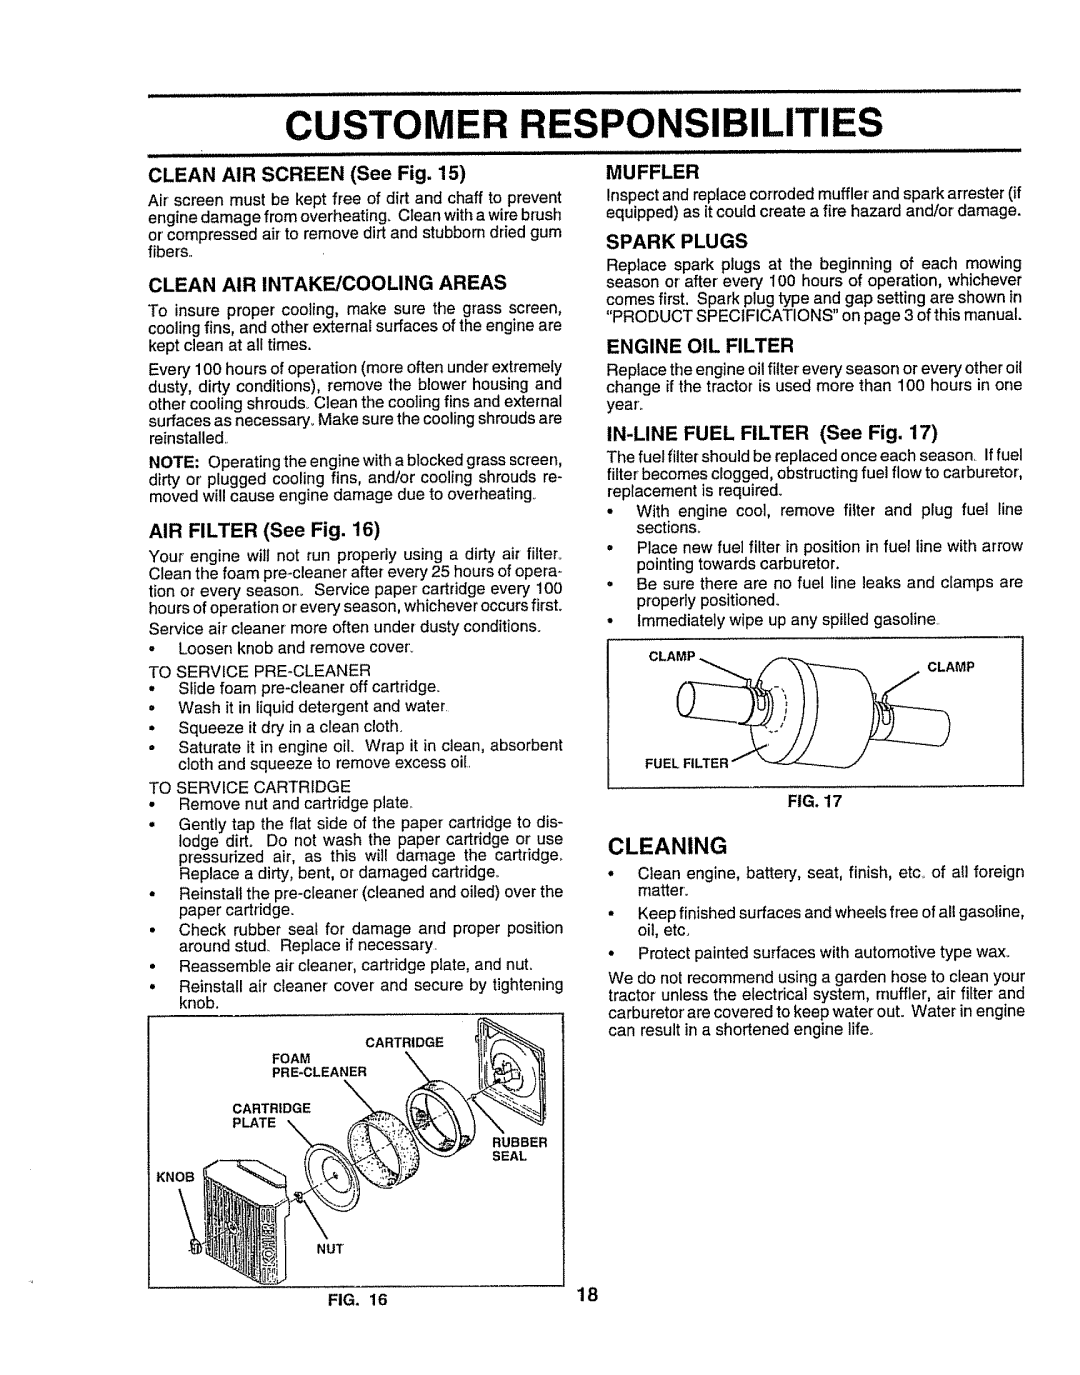 Craftsman 917O251550 owner manual Customer, Cleaning, AIR FILTER See Fig, Muffler, Spark Plugs, Engine Oil Filter 